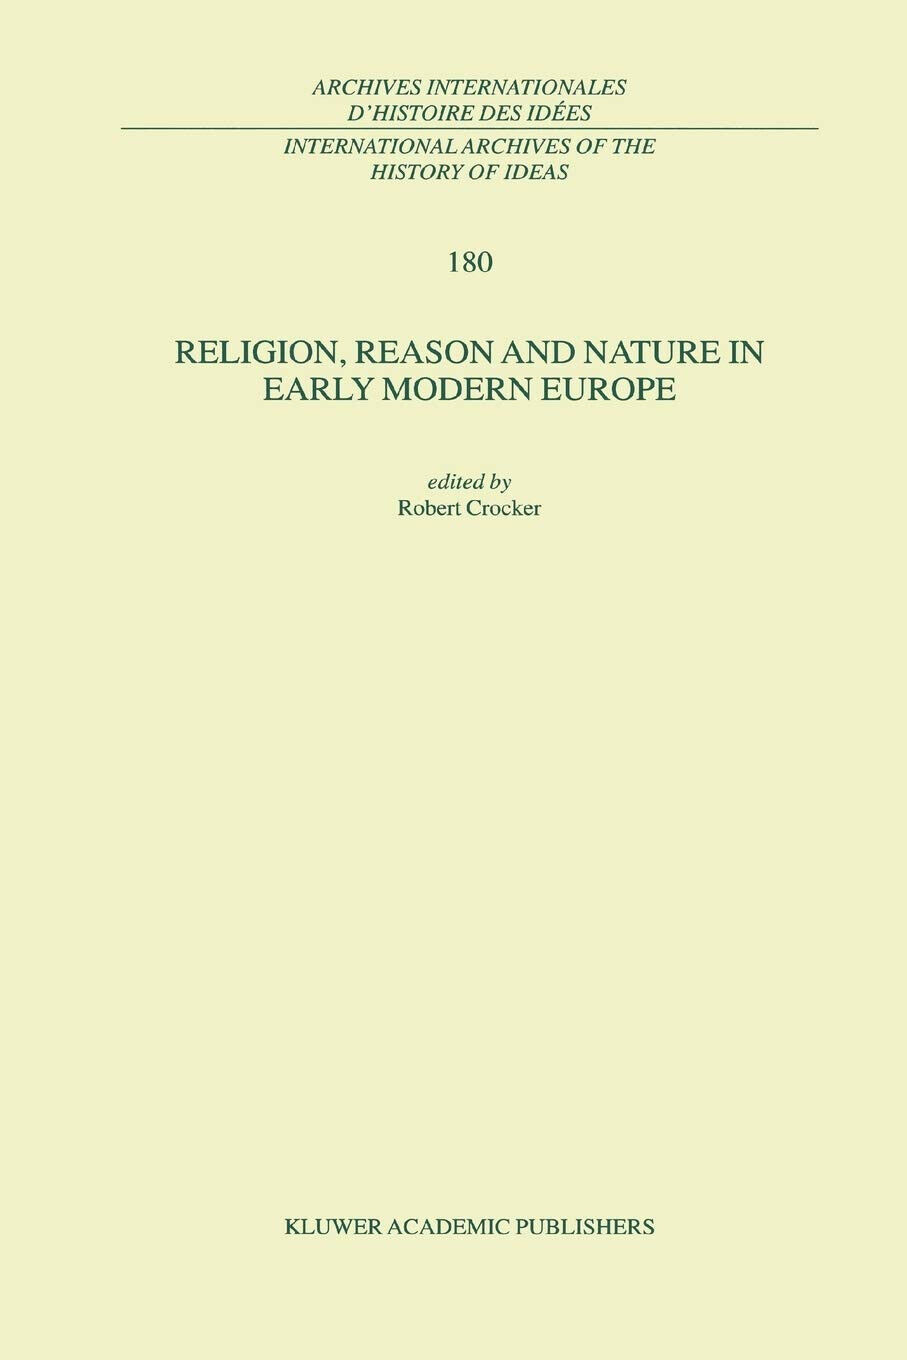 Religion, Reason and Nature in Early Modern Europe - R. Crocker - Springer, 2010